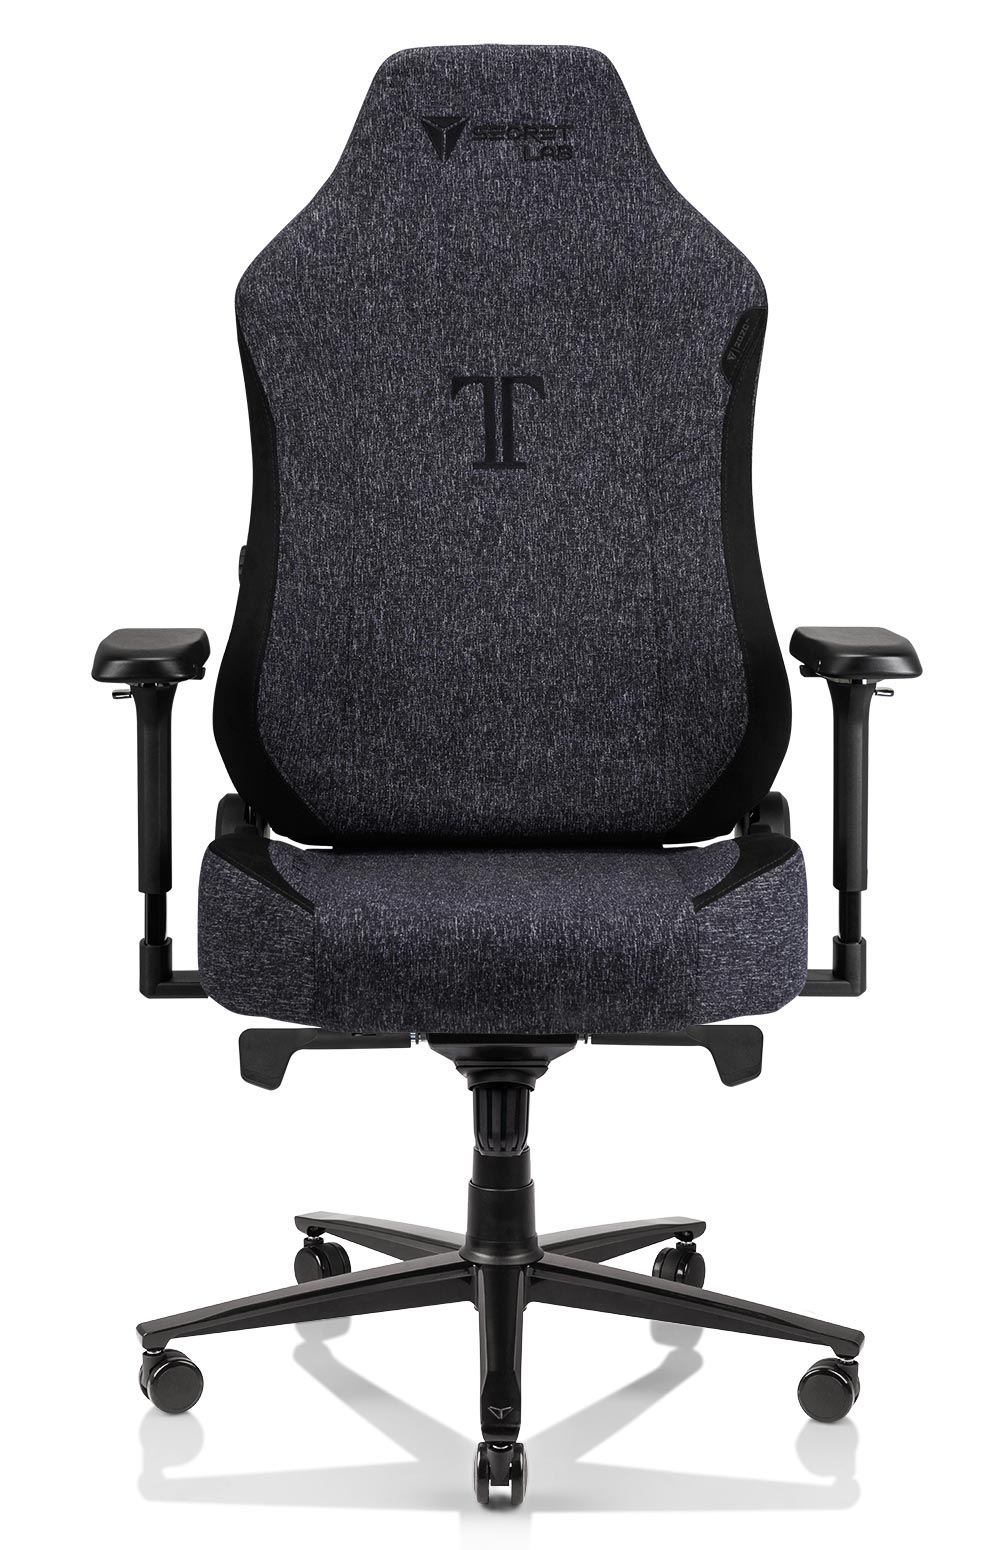 Secretlab Titan Evo Review: Is This Gaming Chair Good for Working From  Home?